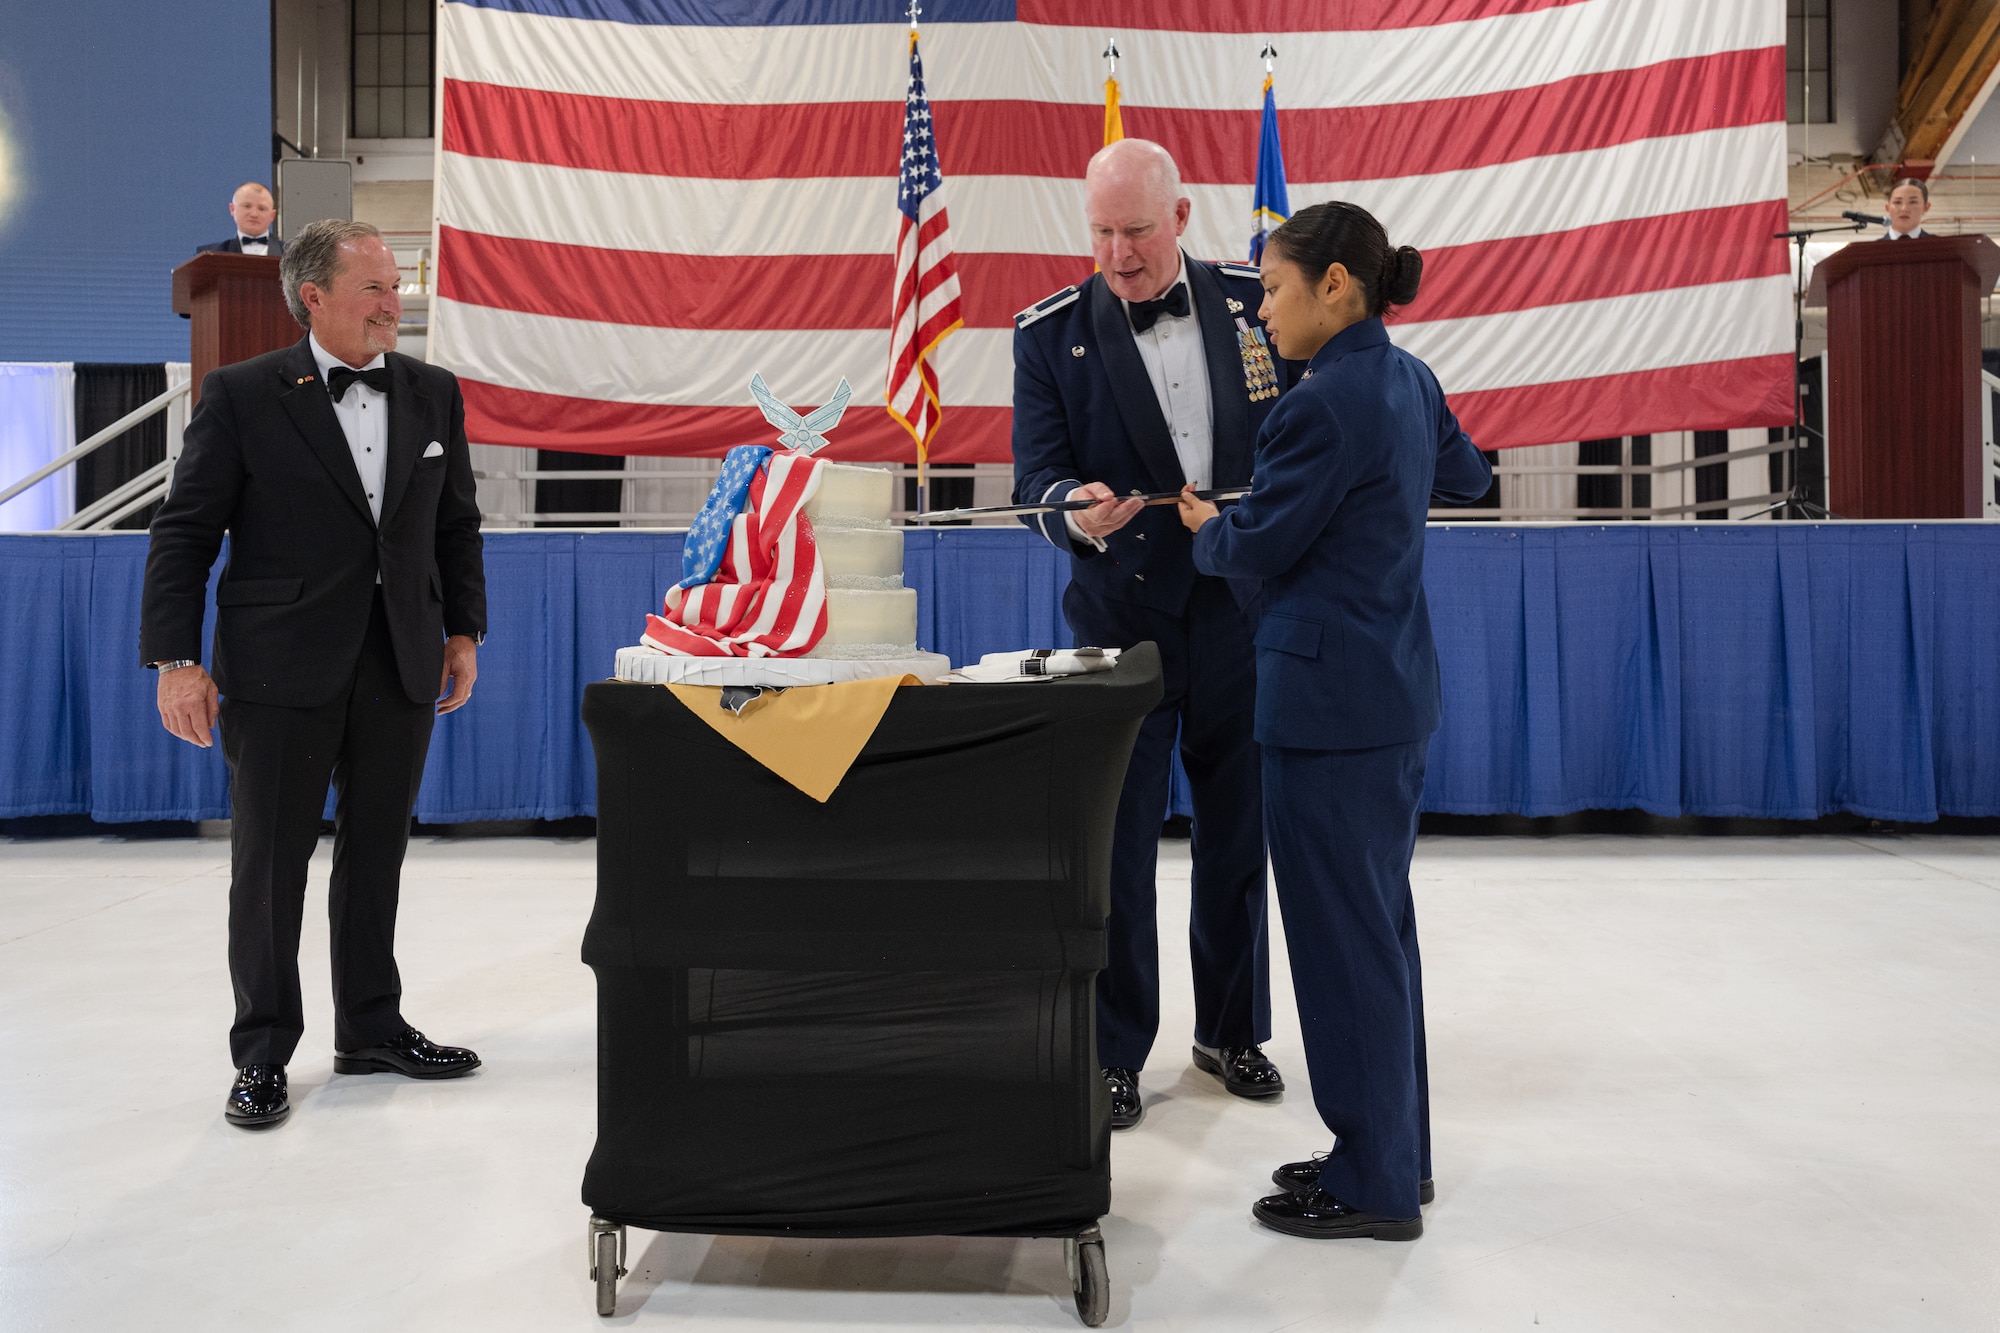 Retired U.S. Air Force Gen. David L. Goldfein, left, watches as U.S. Air Force Col. Kevin Campbell, 49th Mission Support Group commander, middle, and Airman Basic Sherynne Elgin, 49th Logistics Readiness Squadron aircraft parts store apprentice, cut the cake during the 2023 Holloman Air Force Ball at Holloman Air Force Base, New Mexico, Sept. 23, 2023. It is customary for the most senior and junior Airmen to cut the cake which represents the heritage between generations. (U.S. Air Force photo by Senior Airman Antonio Salfran)